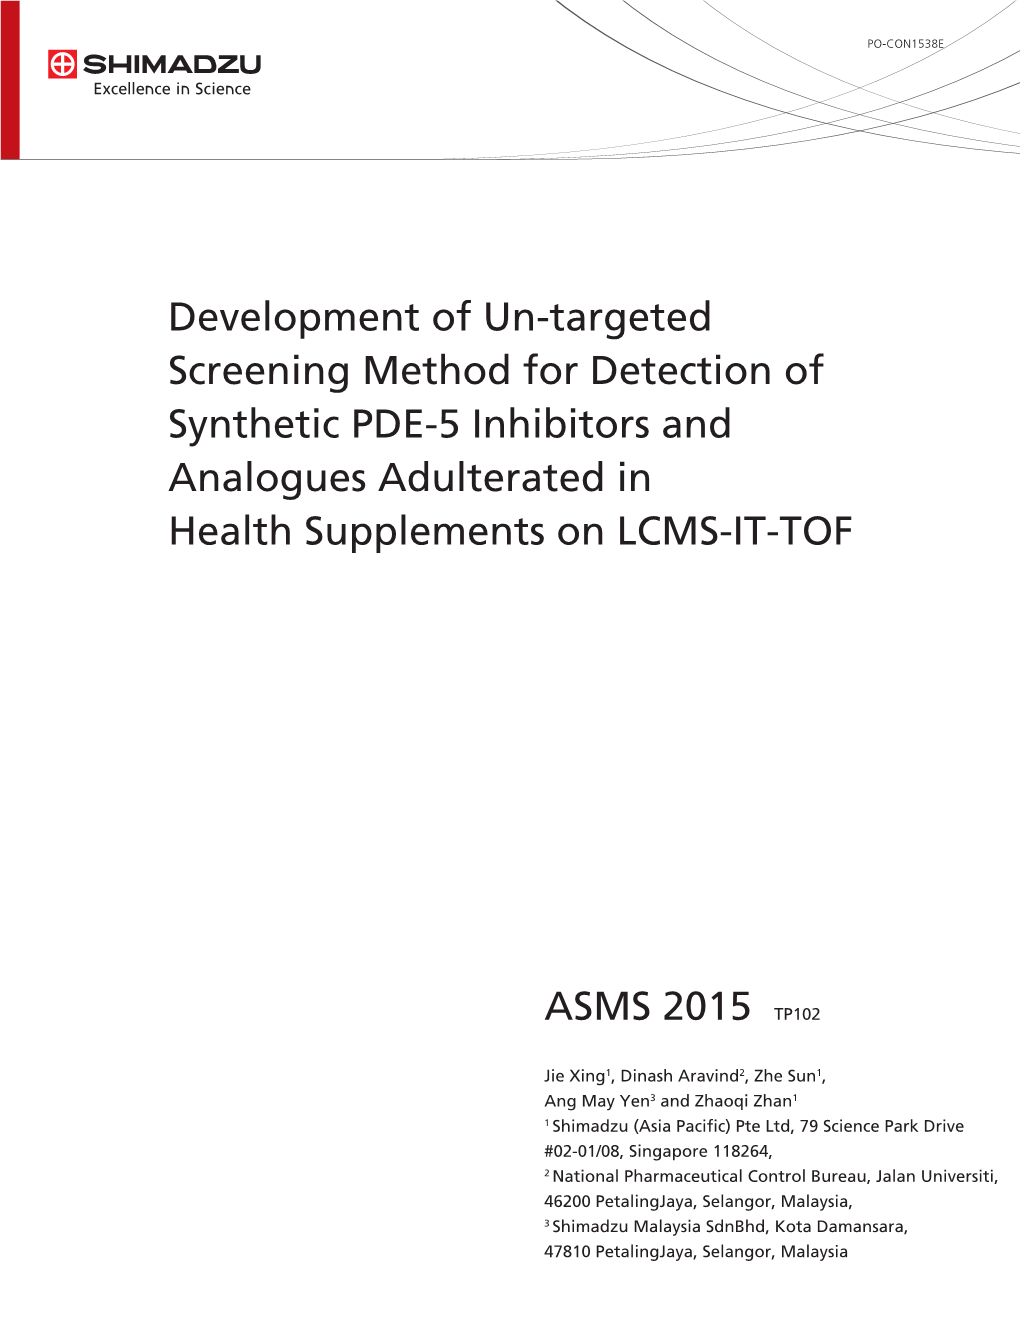 Development of Un-Targeted Screening Method for Detection of Synthetic PDE-5 Inhibitors and Analogues Adulterated in Health Supplements on LCMS-IT-TOF